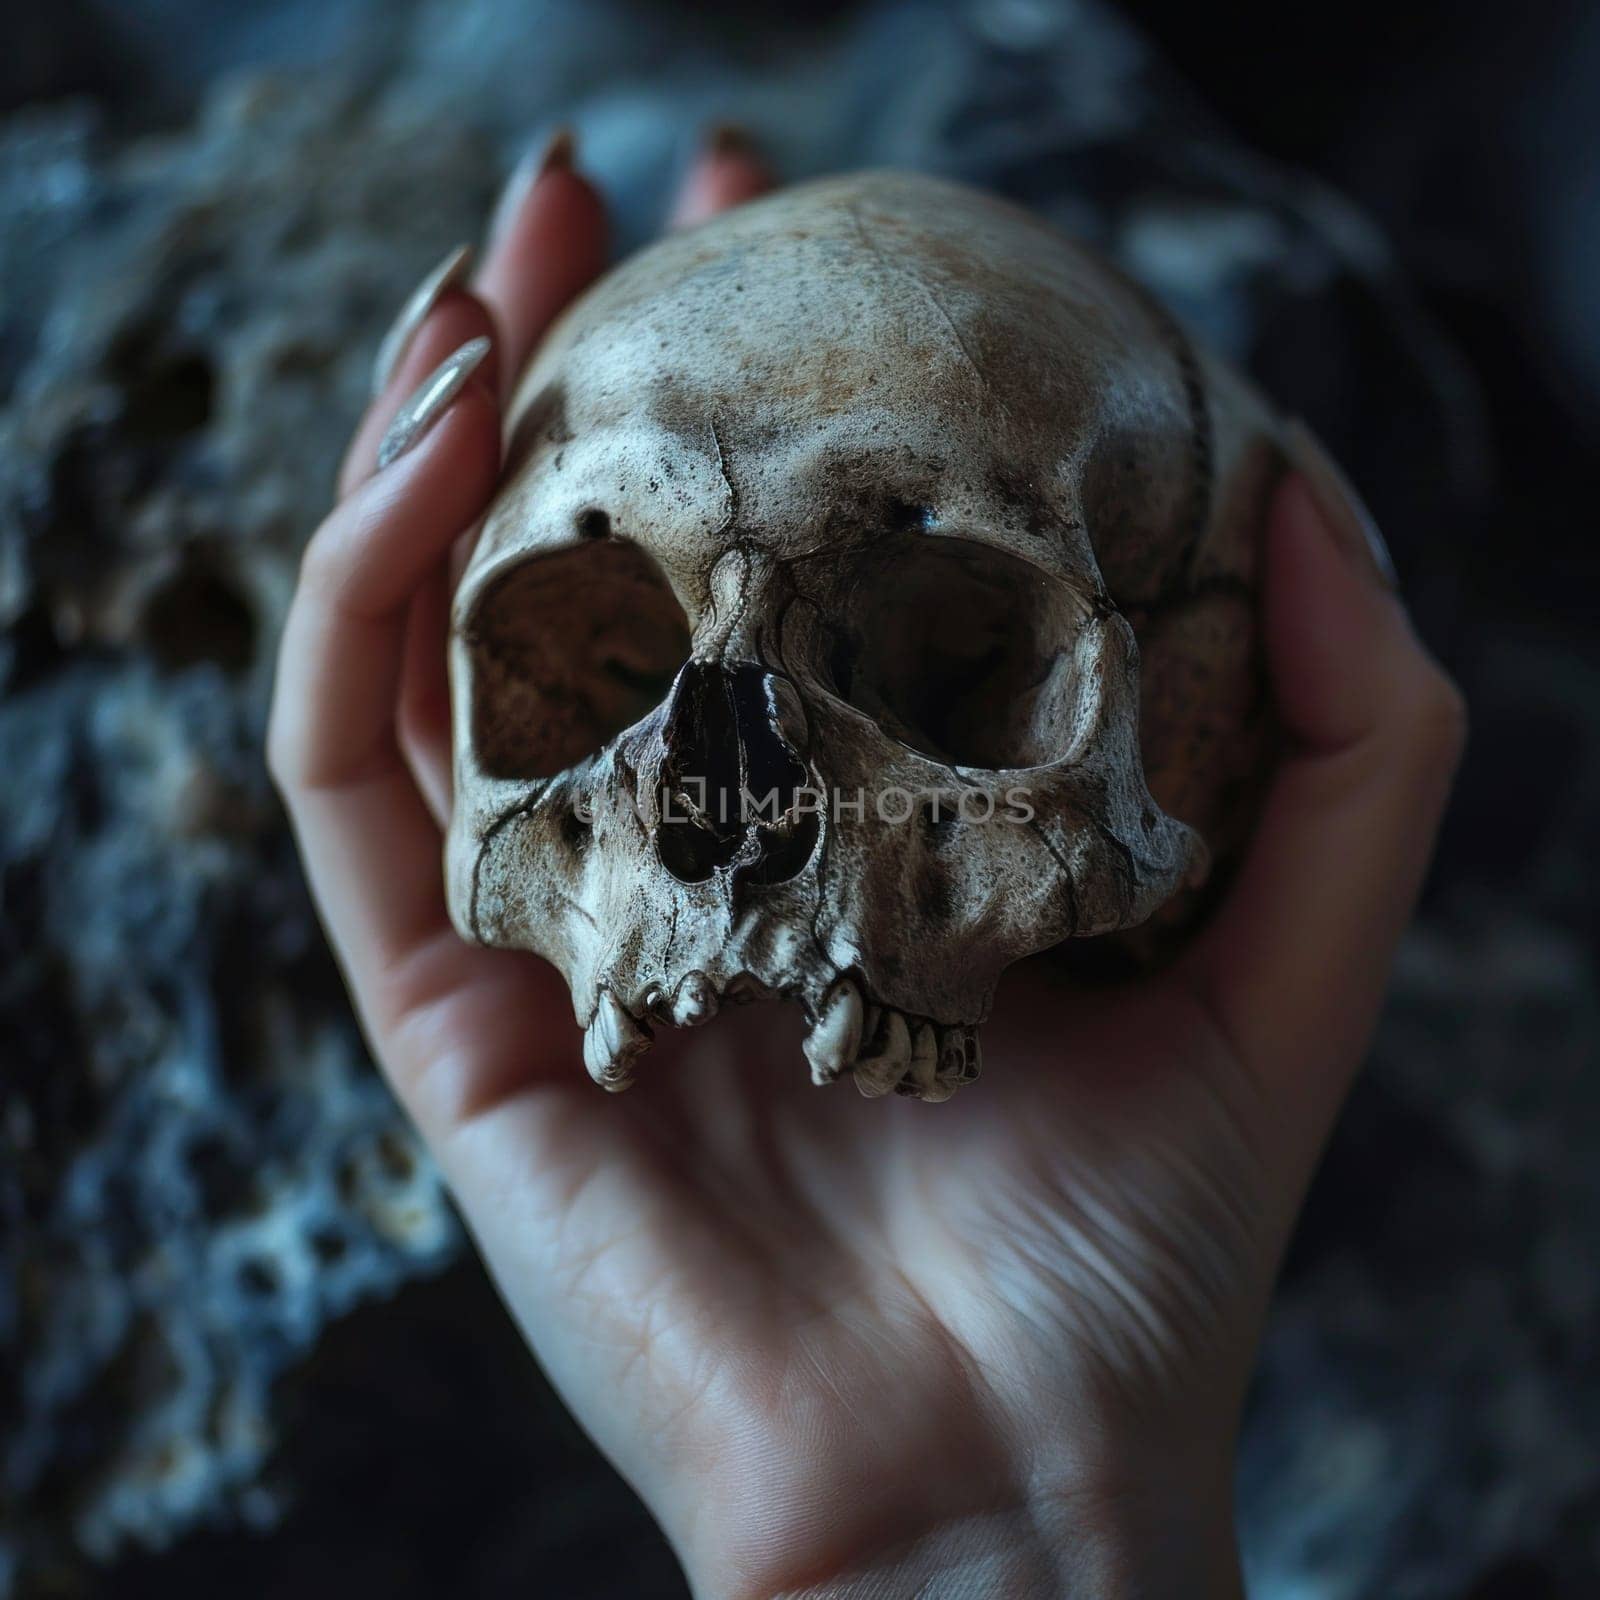 A person holding a small human skull in their hand